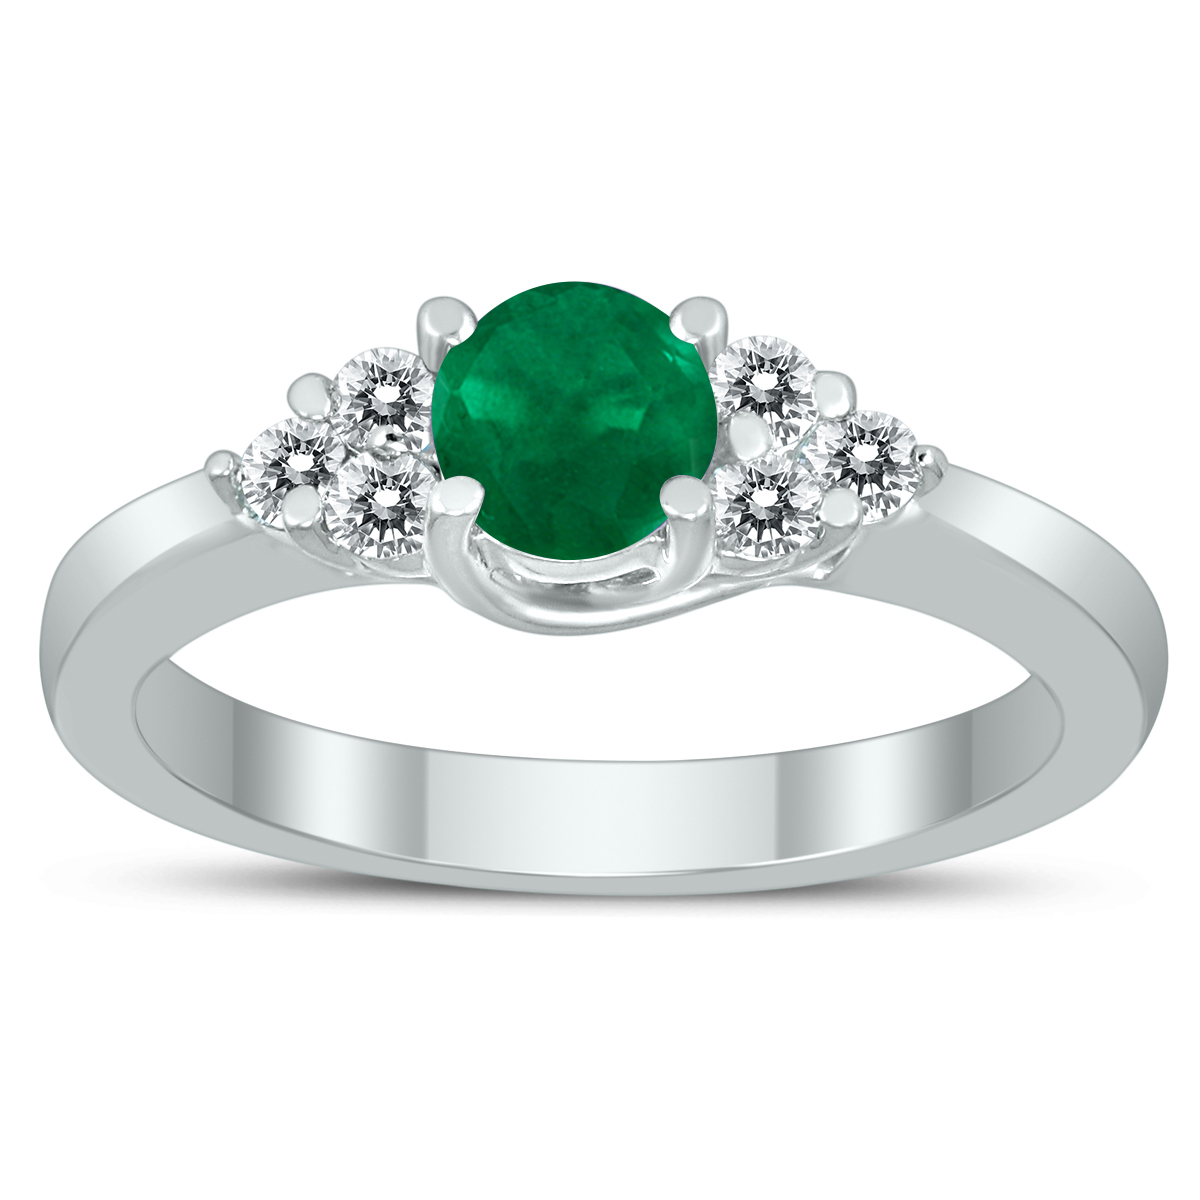 5MM Emerald and Diamond Cynthia Ring in 10K White Gold